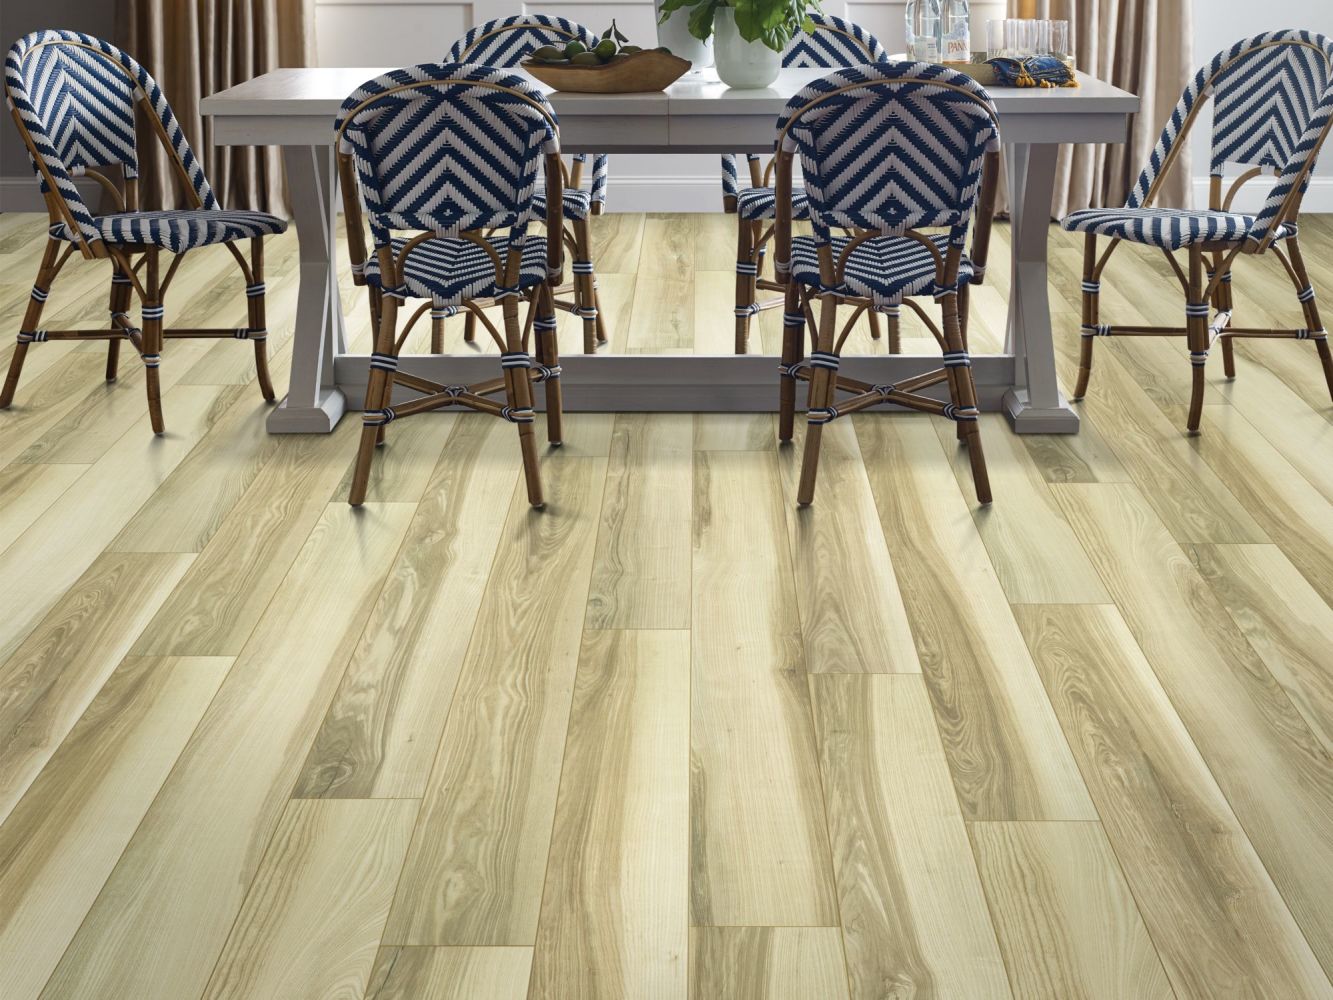 Shaw Floors 5th And Main Expedition Plus Palmetto 00259_5M401